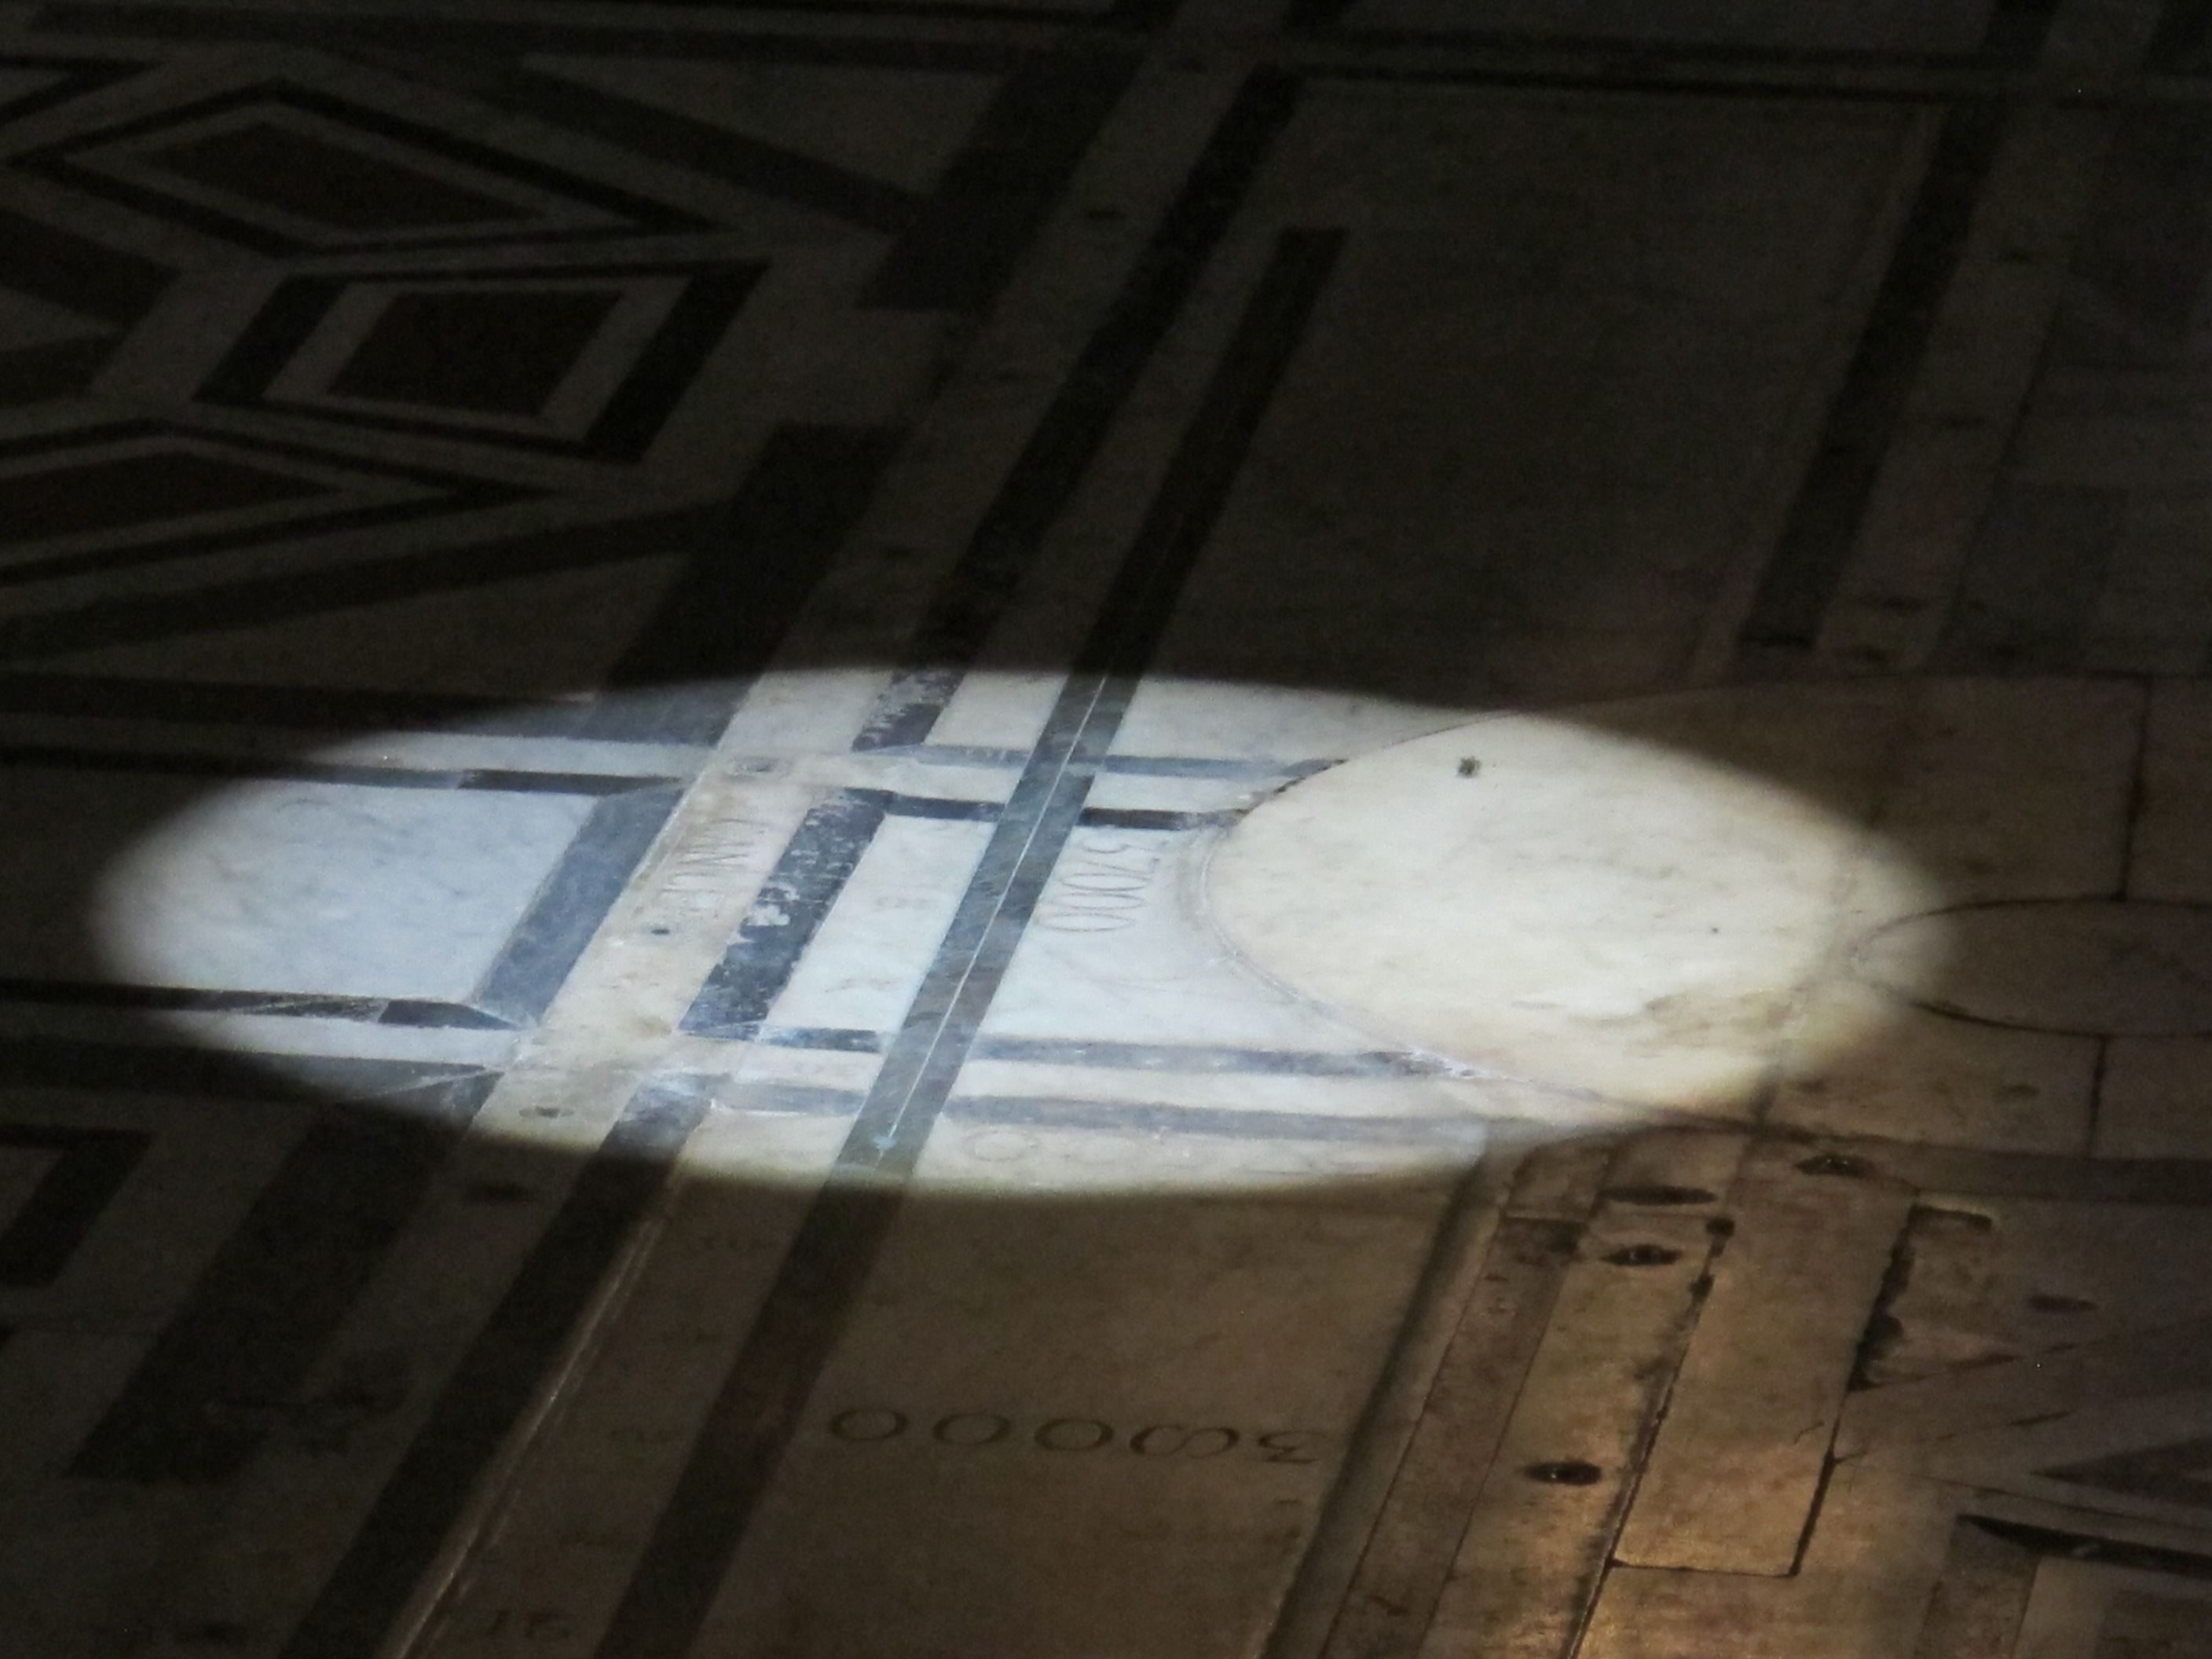 The gnomon projection on the floor of the Santa Maria del Fiore Cathedral during the solstice